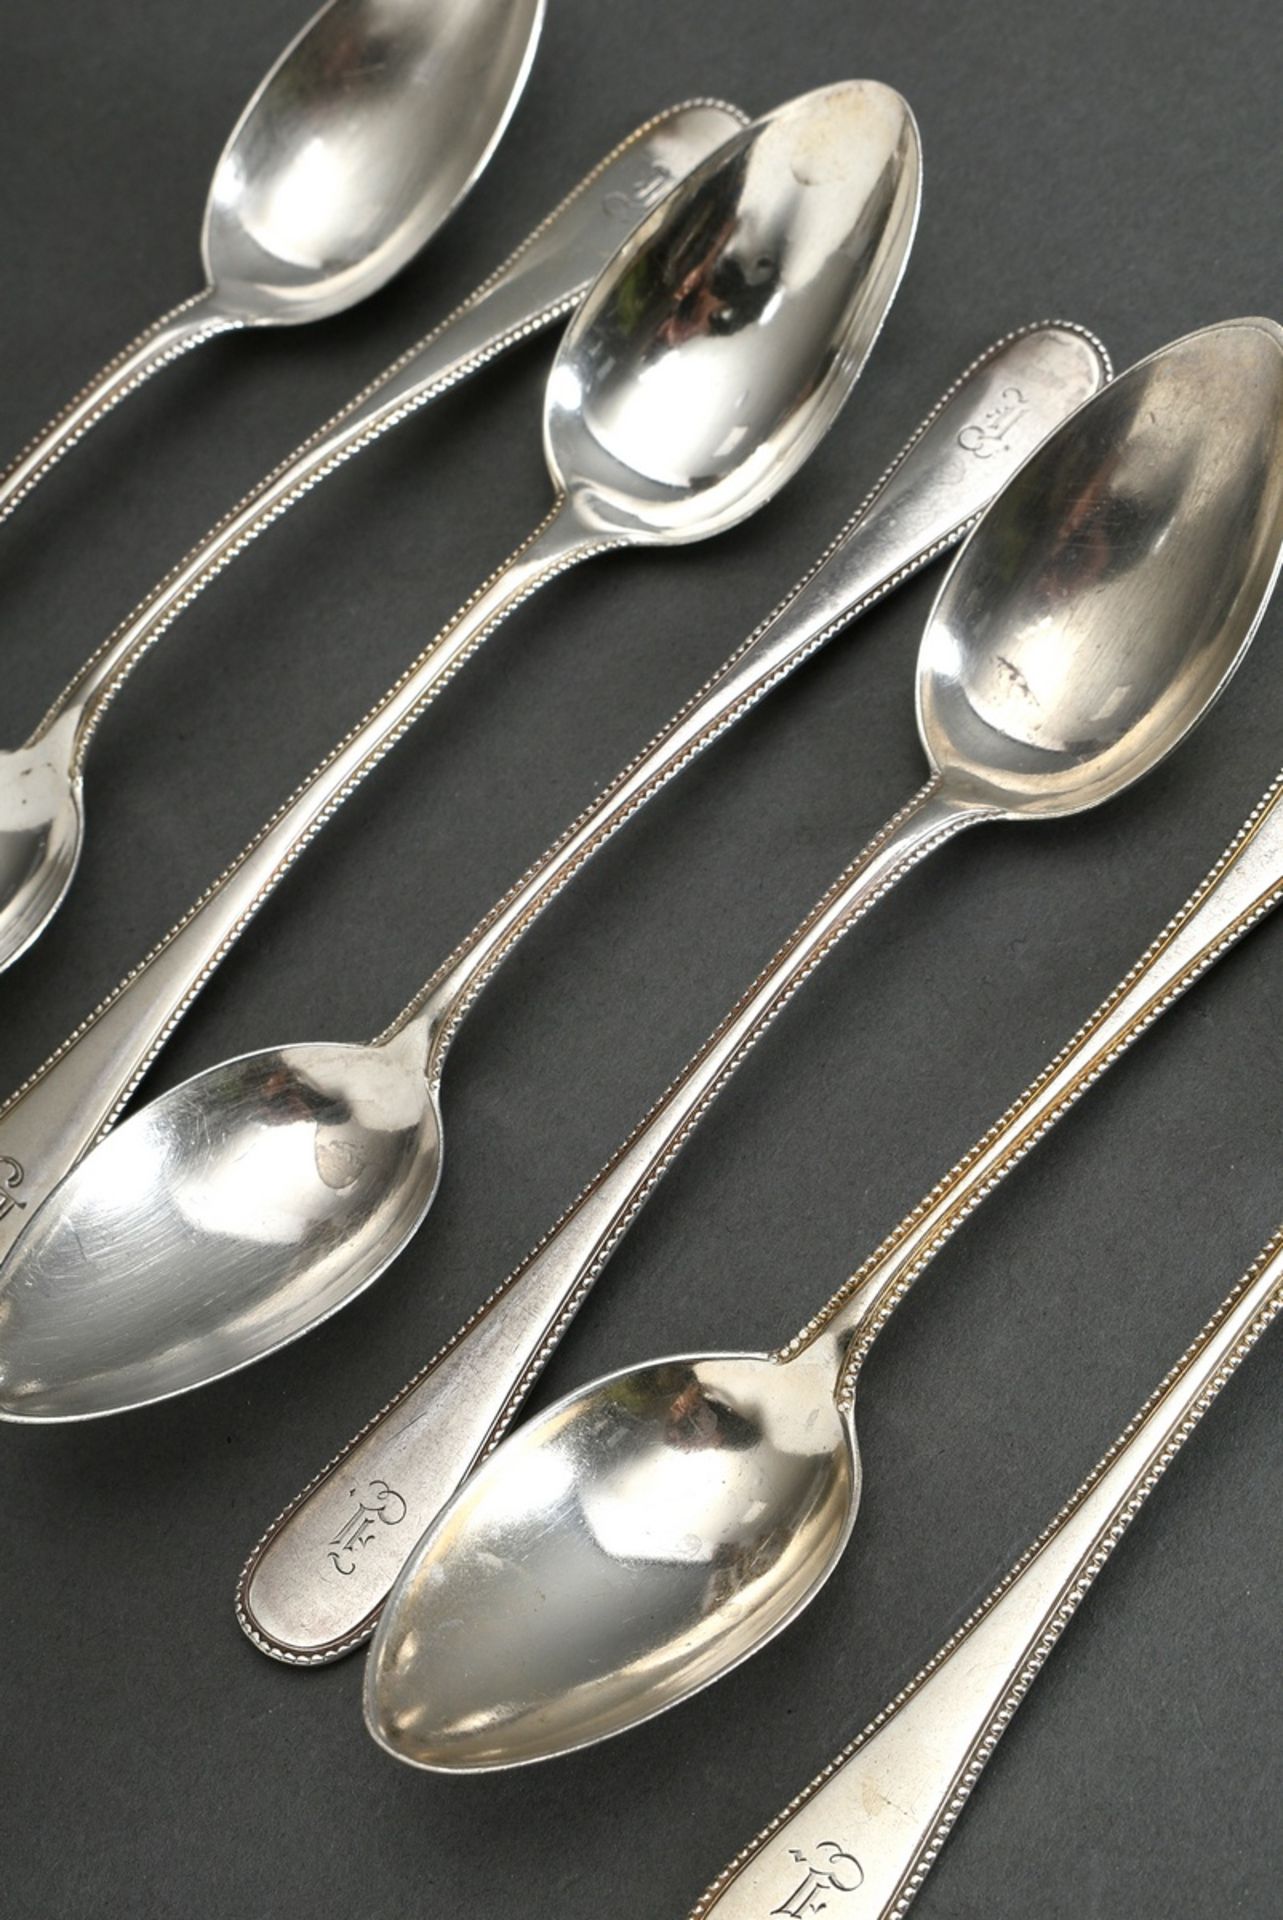 7 teaspoons with pearl pattern and monogram engraving "I", Wilkens & Söhne/ Bremen, jeweller's mark